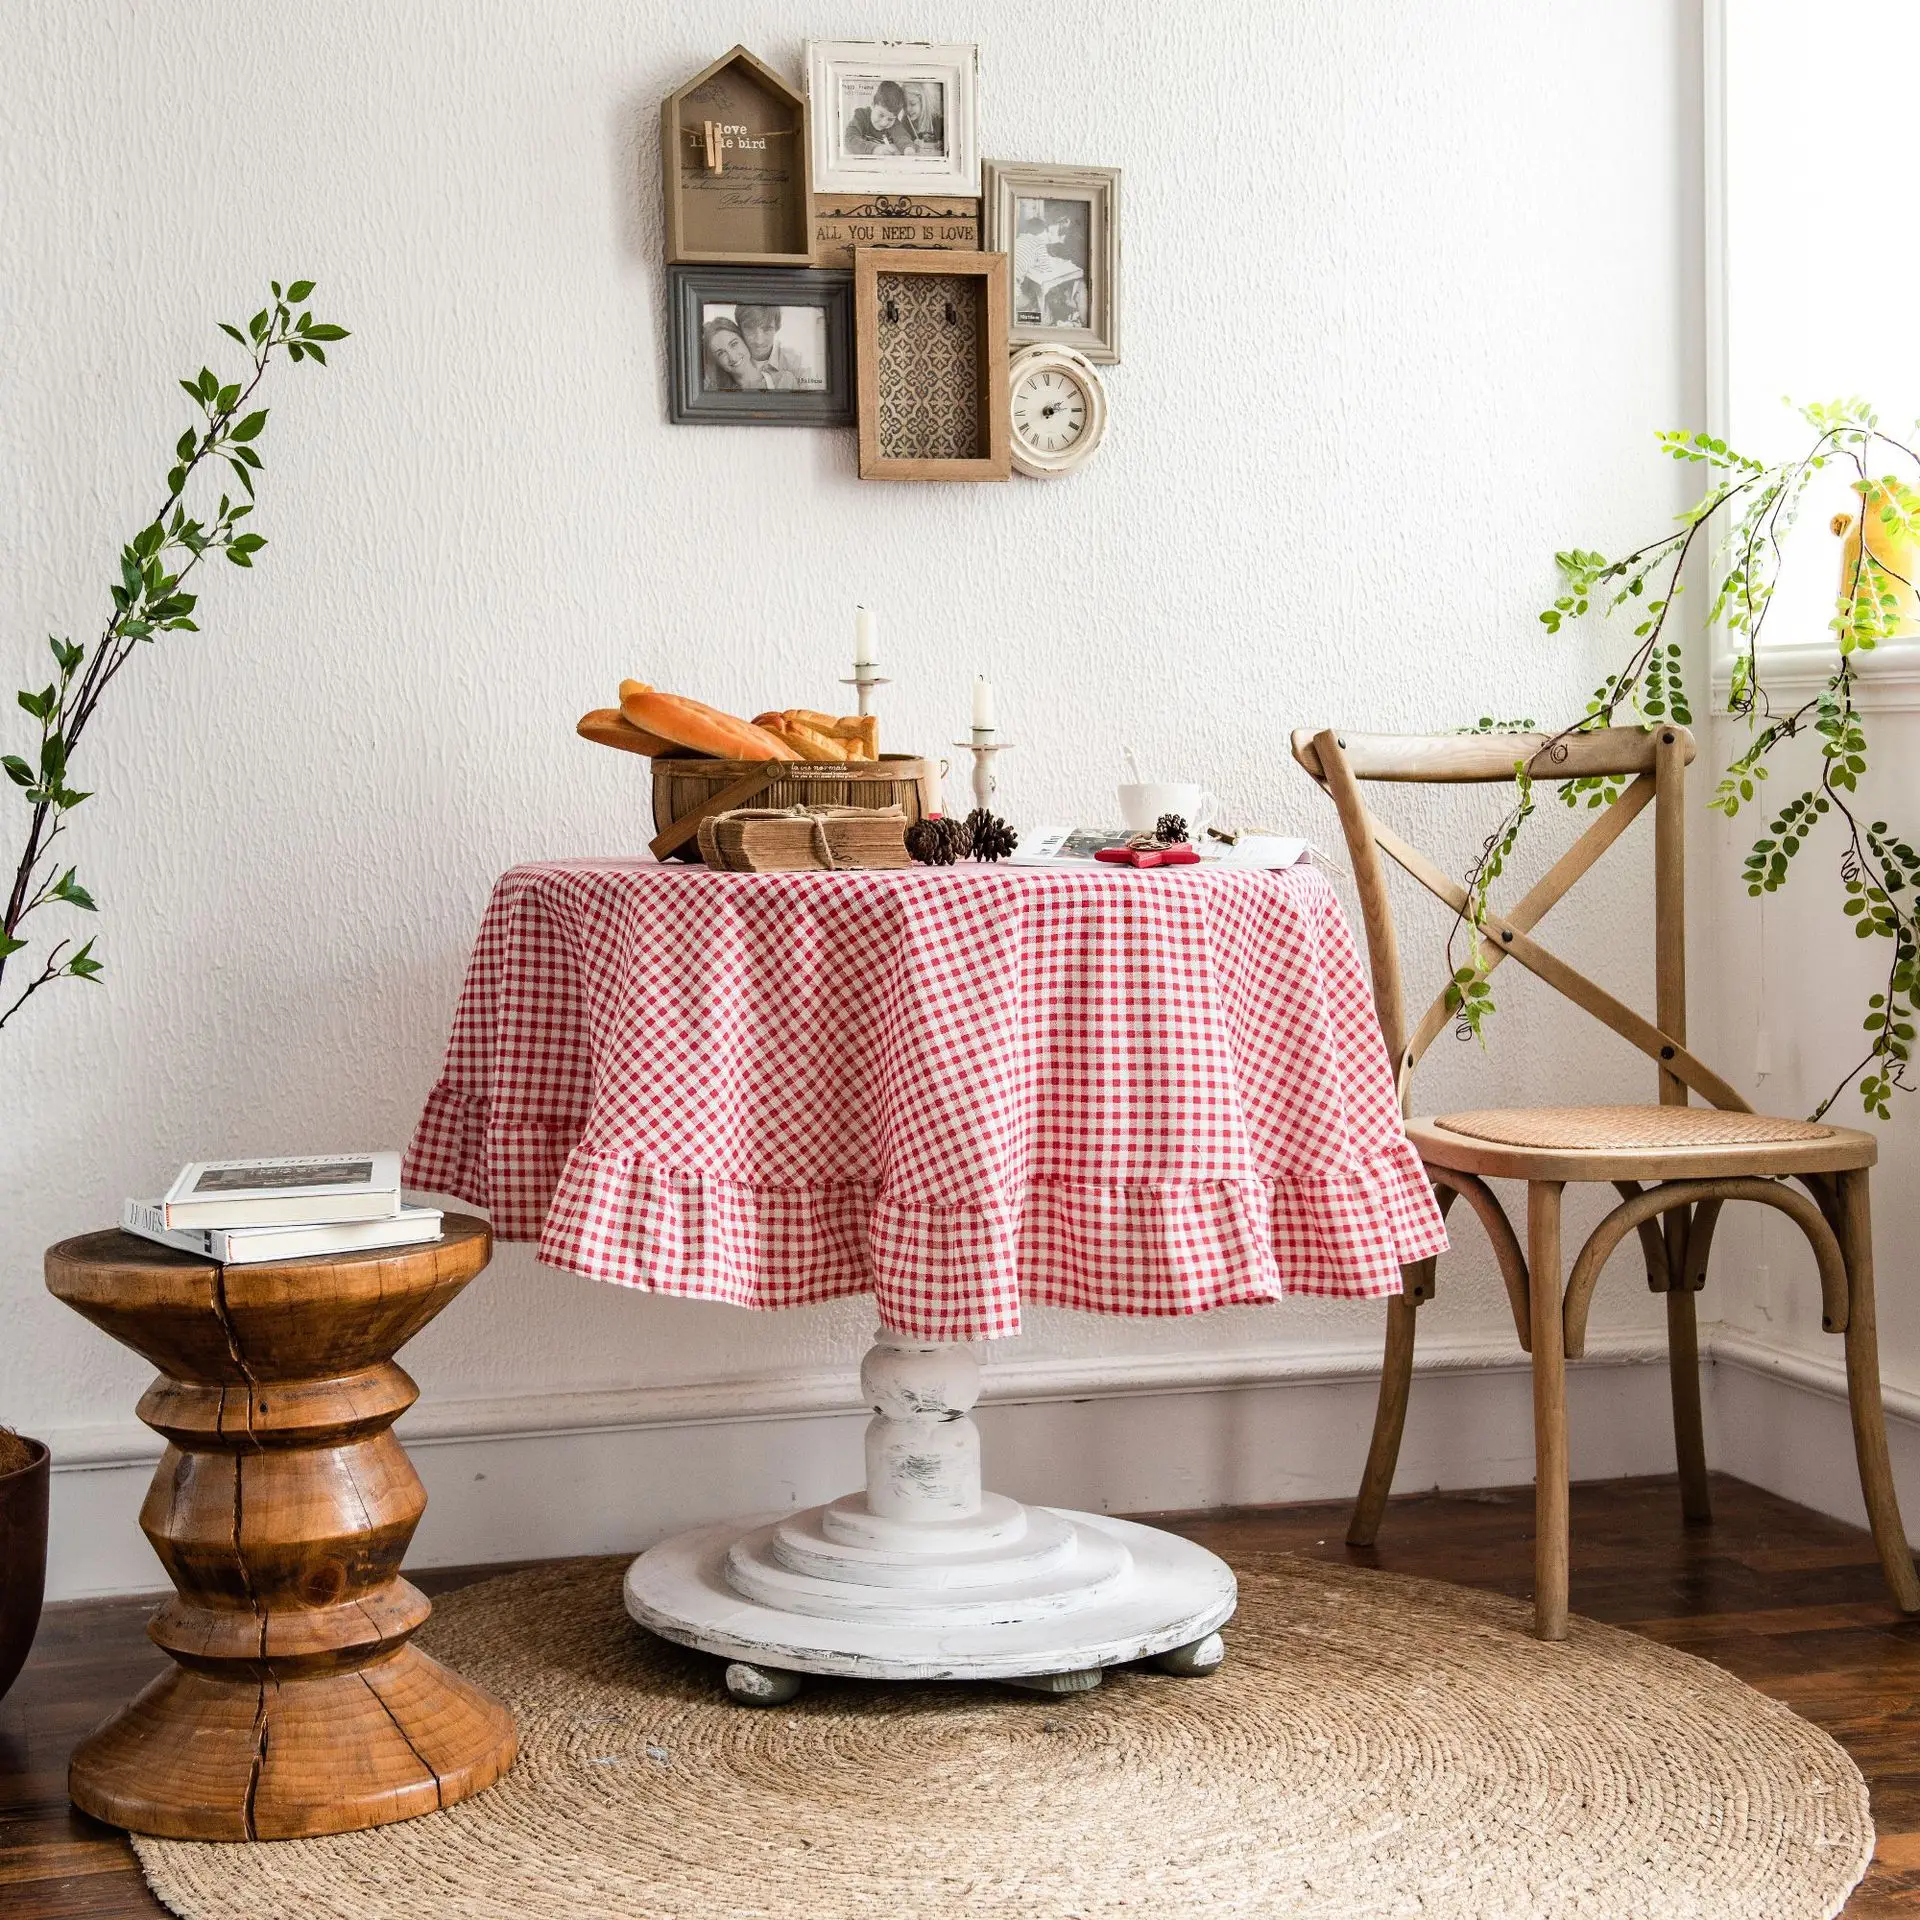 

Table Cloth Round Linen 150cm For Dining Kitchen Banquet Red Plaid Grid Dustproof Home Decor Tablecloth Mantel Mesa Nappe